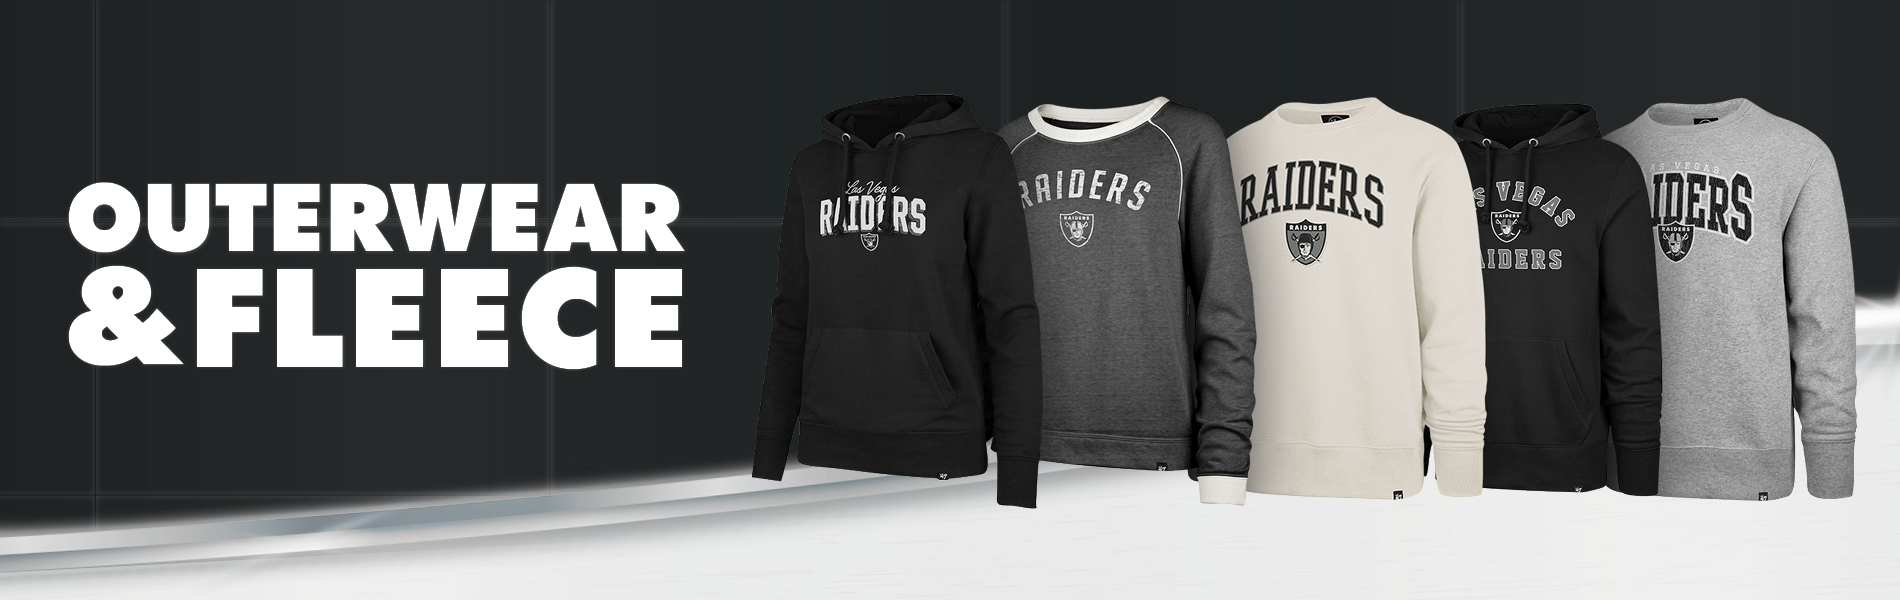 The Raider Image The Official Store Of The Raiders